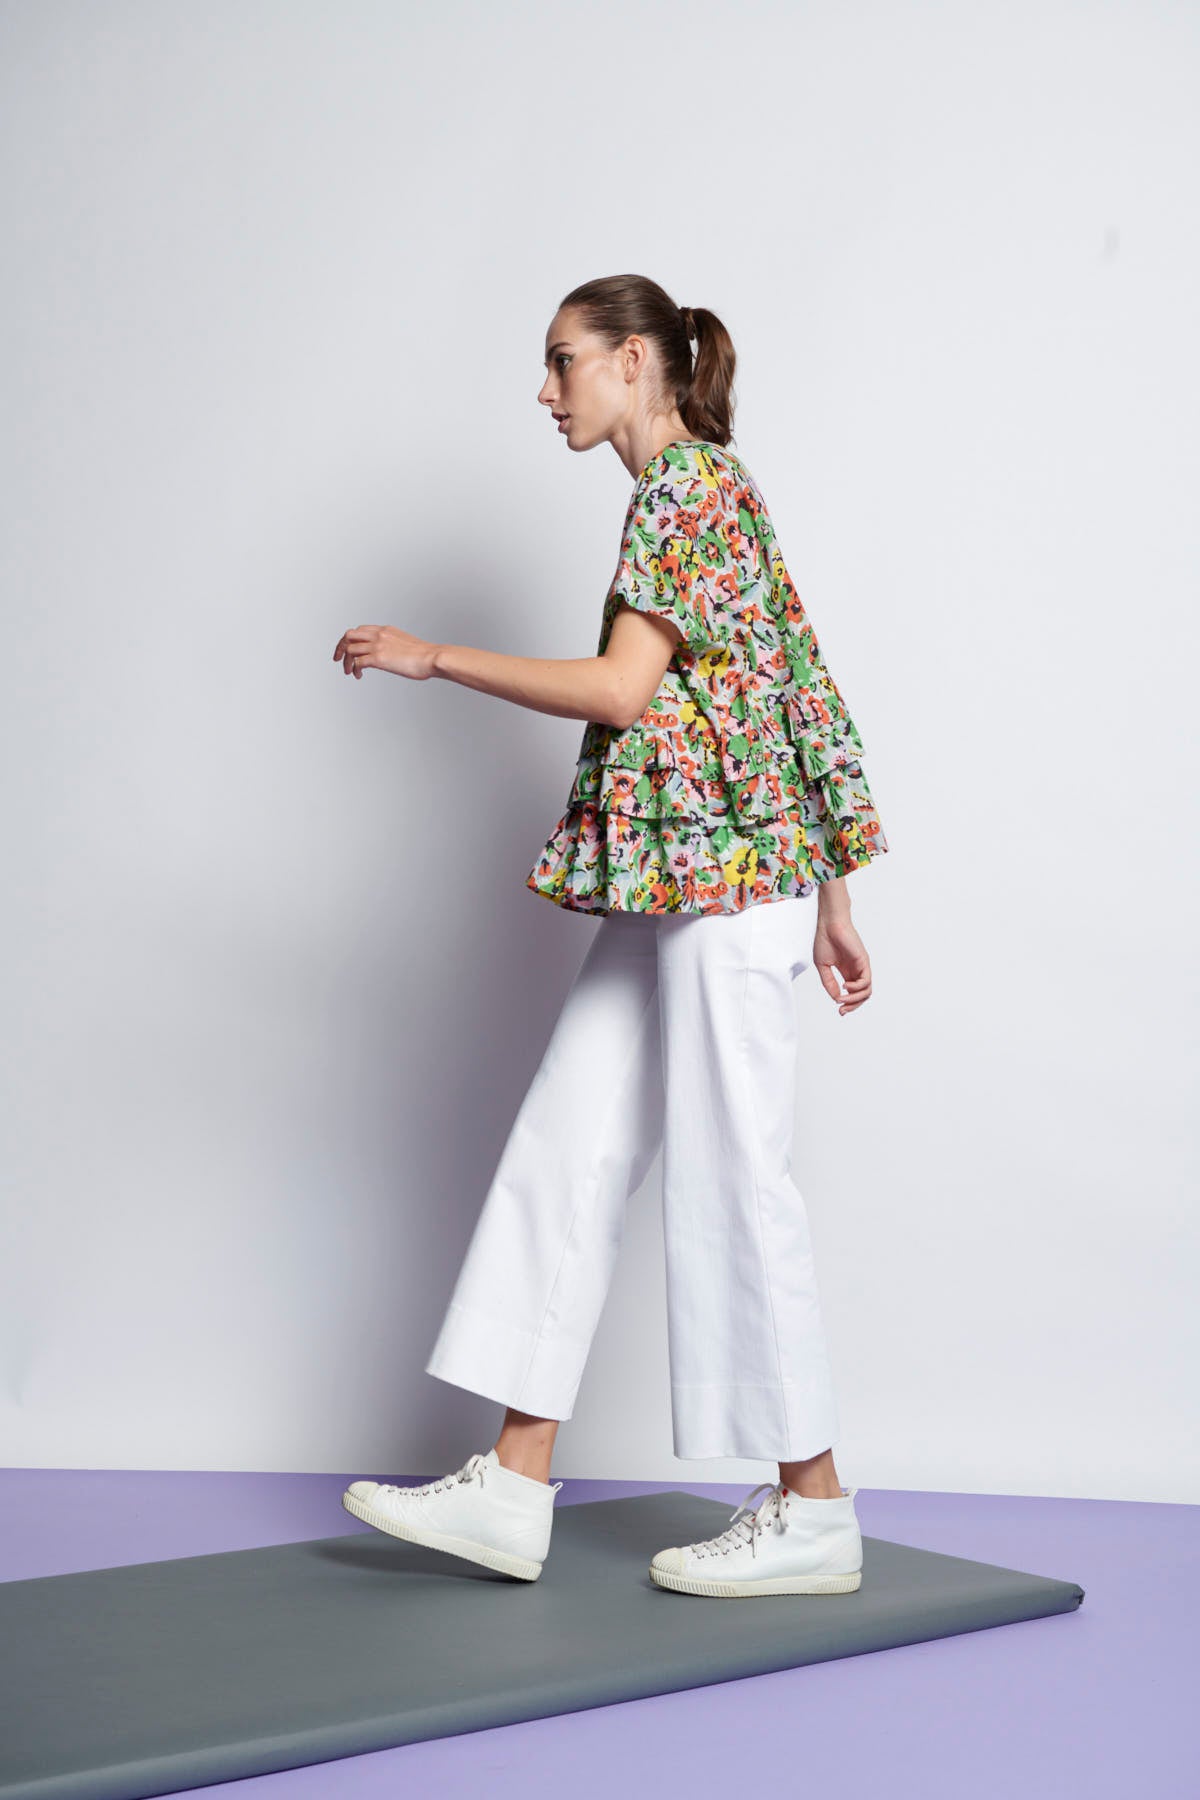 An easy-fit, tiered ruffle cotton top with round neckline and short sleeves and floral print